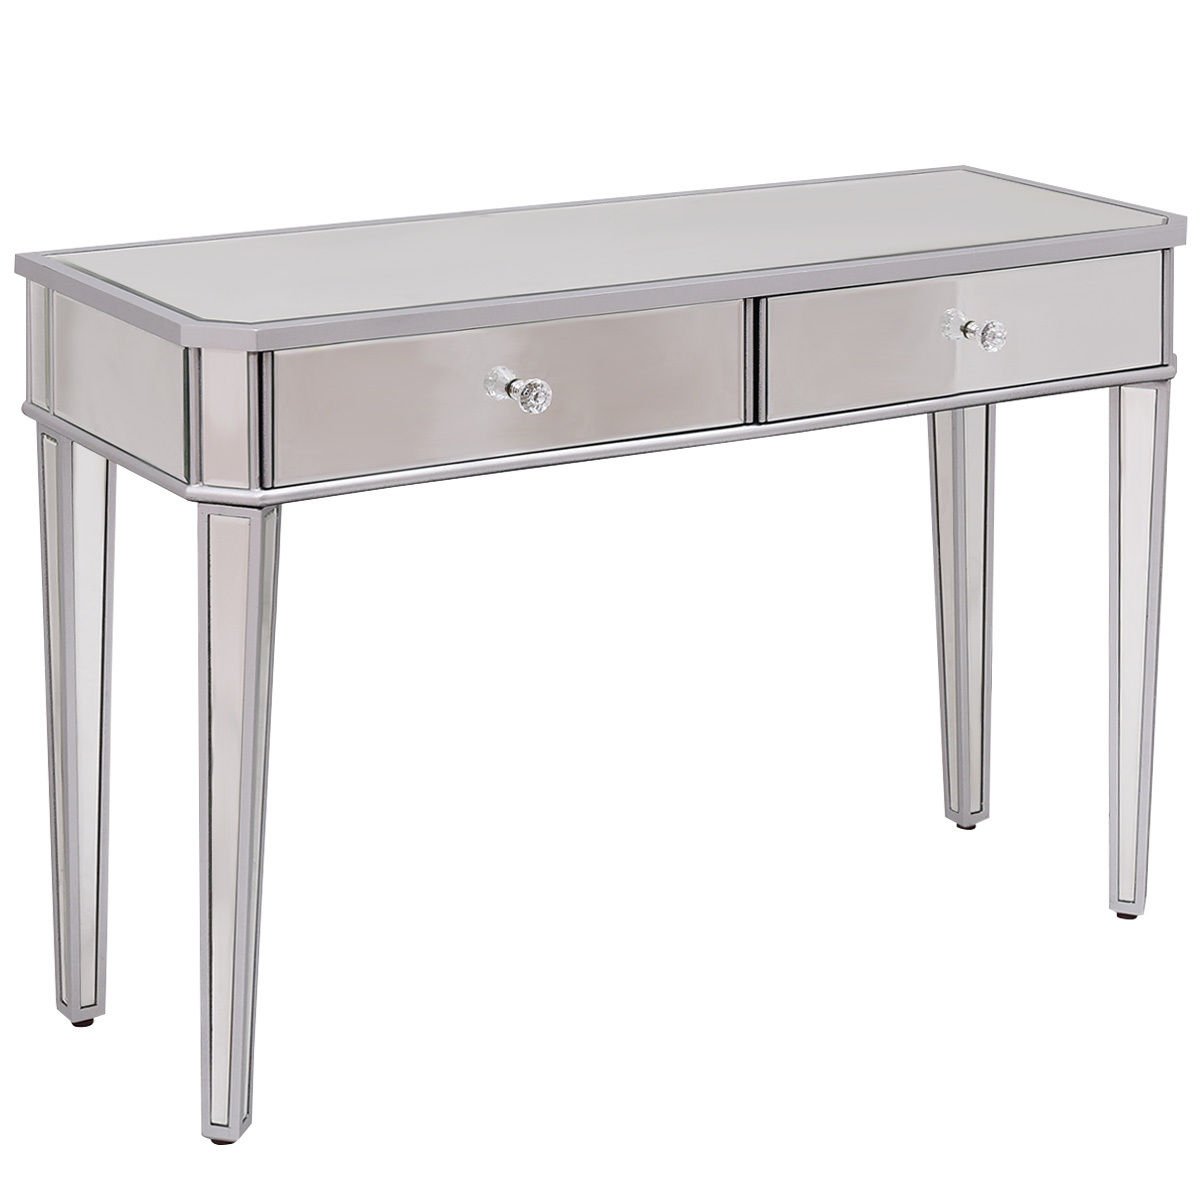 modern mirrored vanity make desk console dressing accent table silver gray drawers glass kitchen dining antique wood coffee tables inexpensive sofa outside grills lucite cube oval